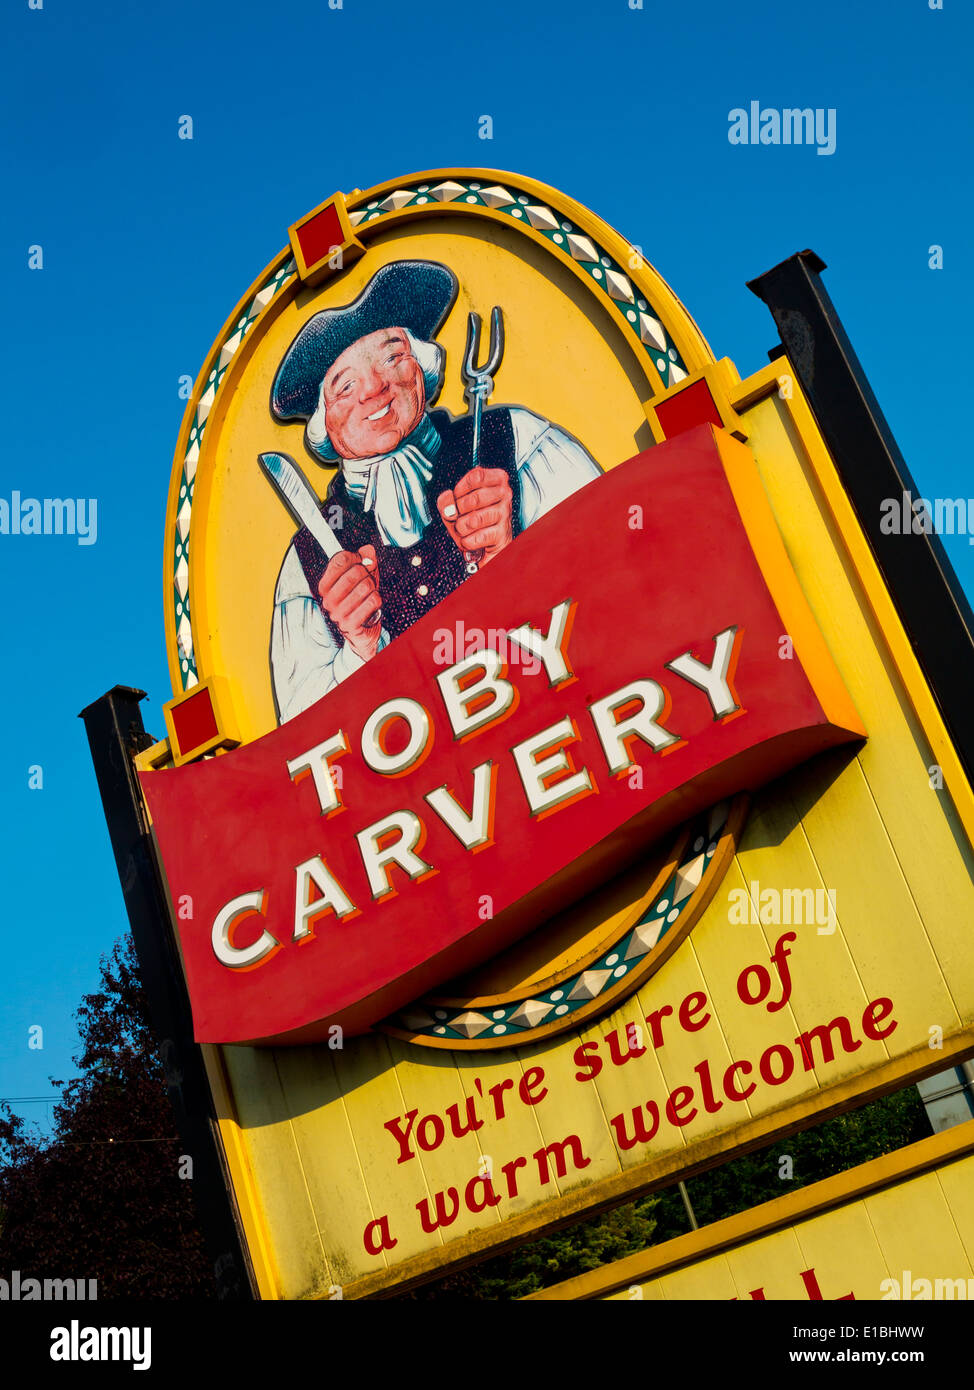 Toby Carvery sign outside a pub in Redhill Surrey England part of  a British carvery chain brand owned by Mitchells and Butlers Stock Photo